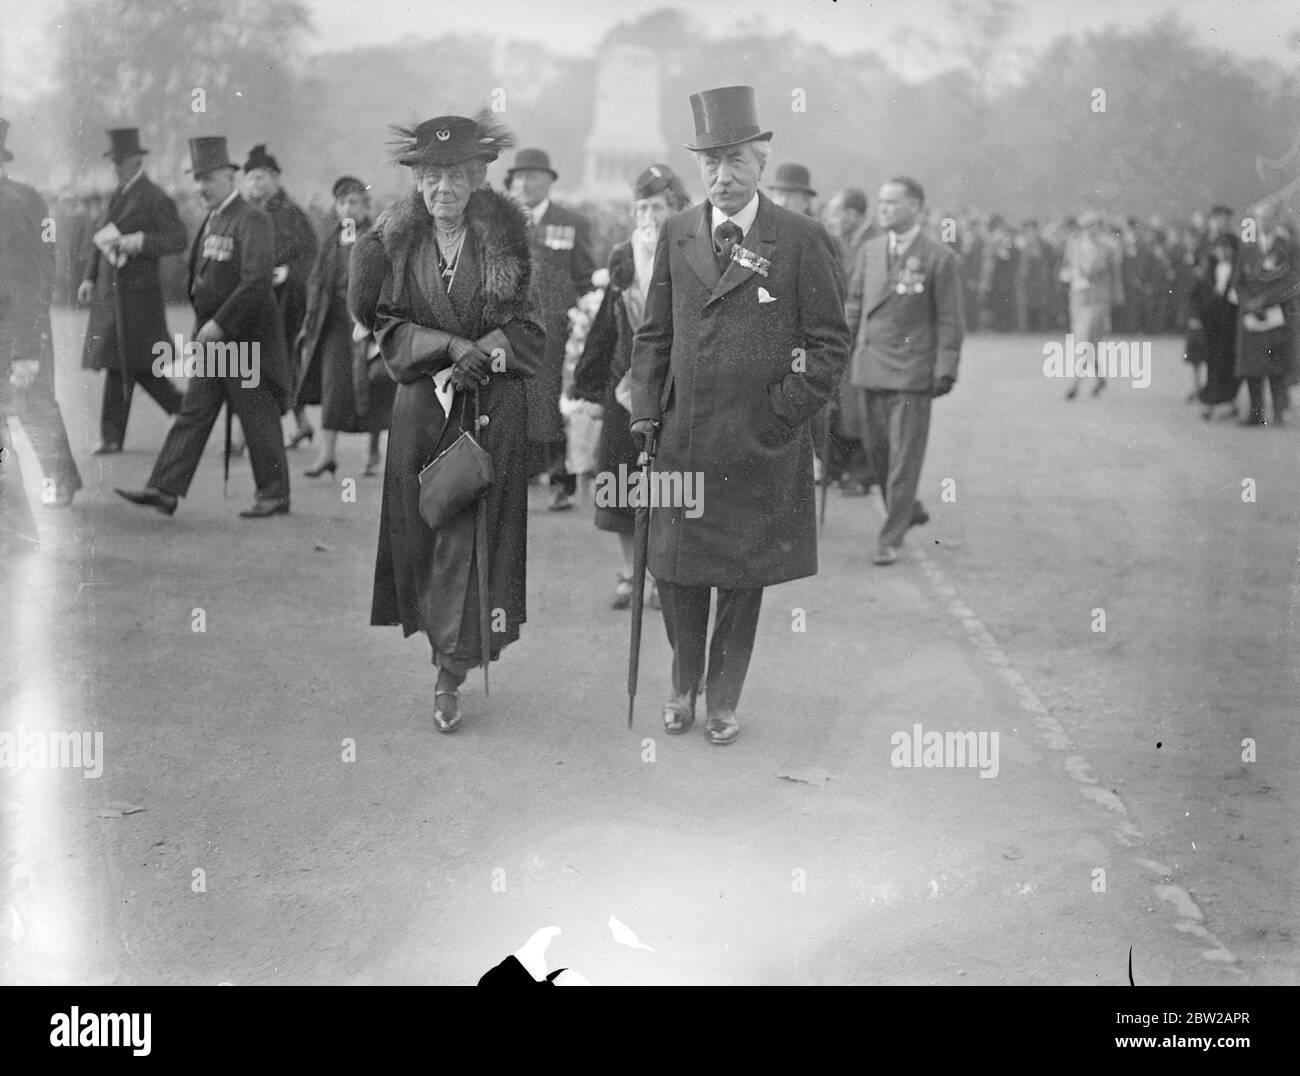 Lady Plumer and Belgian ambassador at Ypres commemoration parade in London. Lady Plumer, wife of Field Marshal Lord Plumer, laid the Ypres Leagues wreath on the Cenotaph, after the 17th anniversary commemoration parade of the Ypres League on Horse Guards Parade. She deputised for Princess Beatrice. Photo shows, Lady Plumer walking to the Cenotaph with the Belgian ambassador, Baron de Cartier de Marchienne. 31 October 1937 Stock Photo